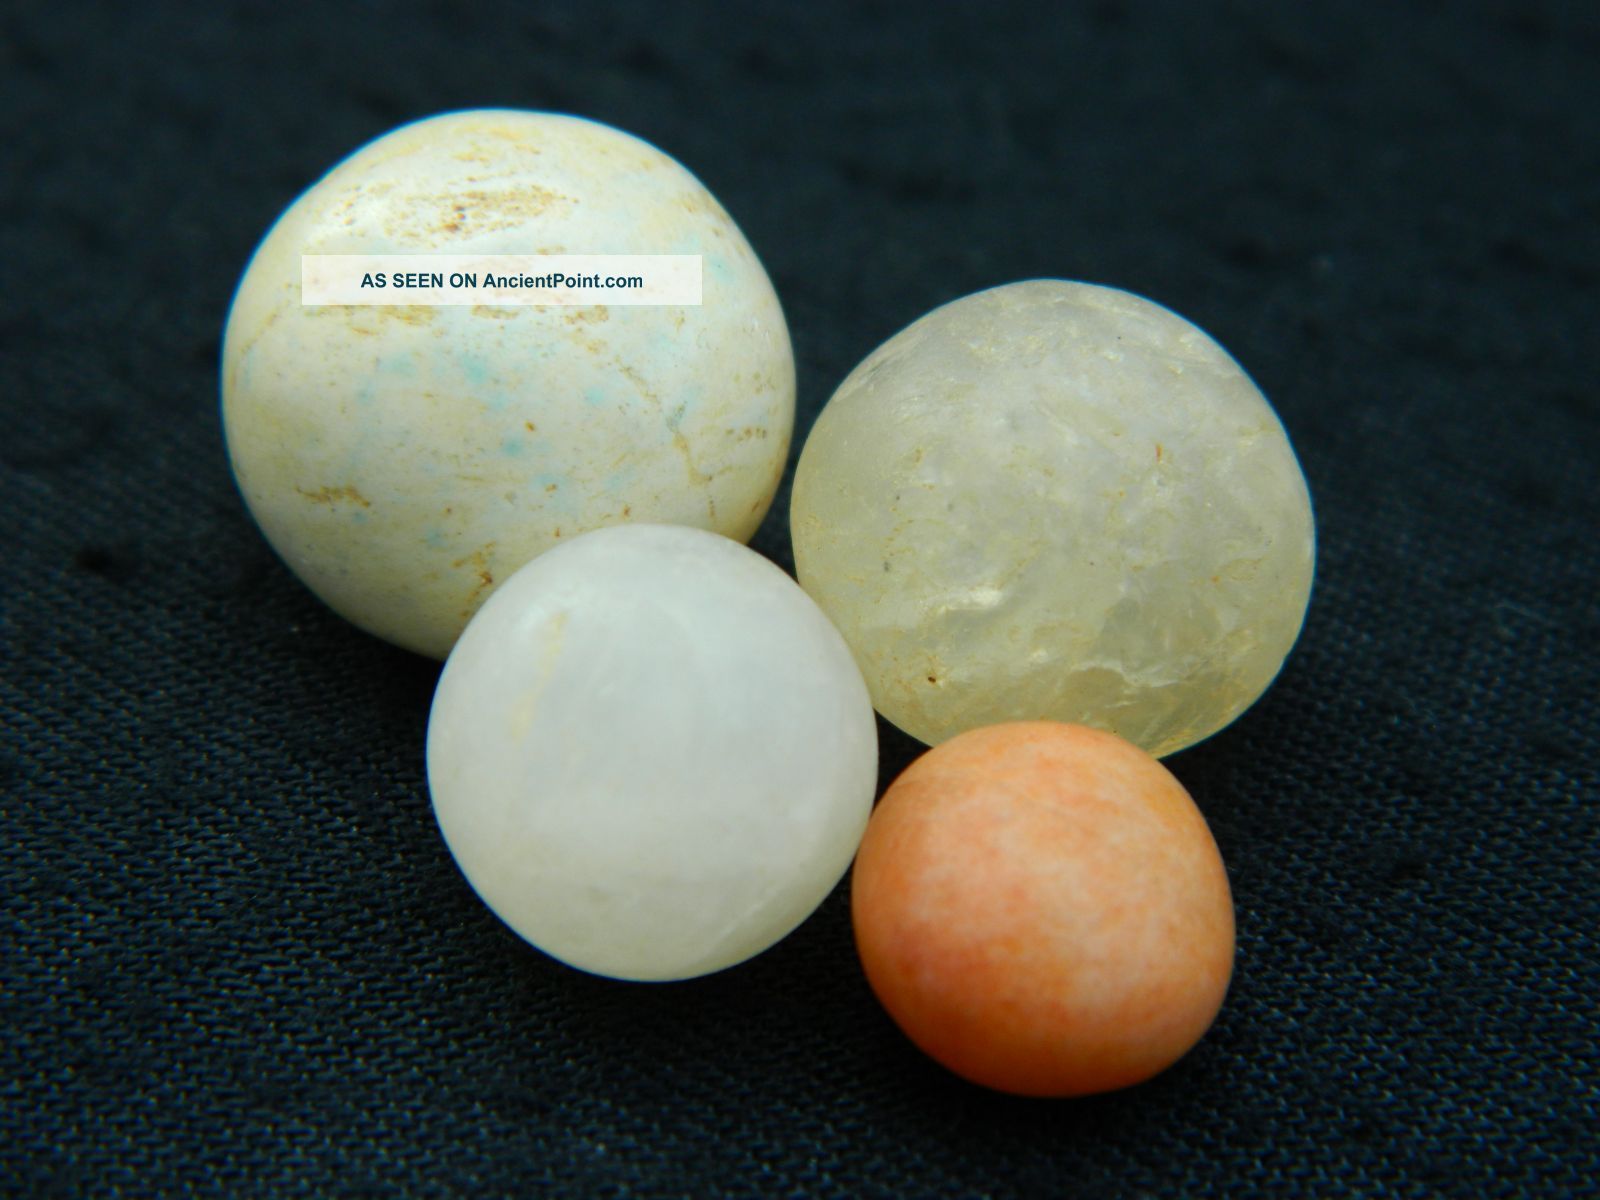 4 Neolithic Neolithique Stone Funeral Balls - 6500 To 2000 Before Present - Sahara Neolithic & Paleolithic photo